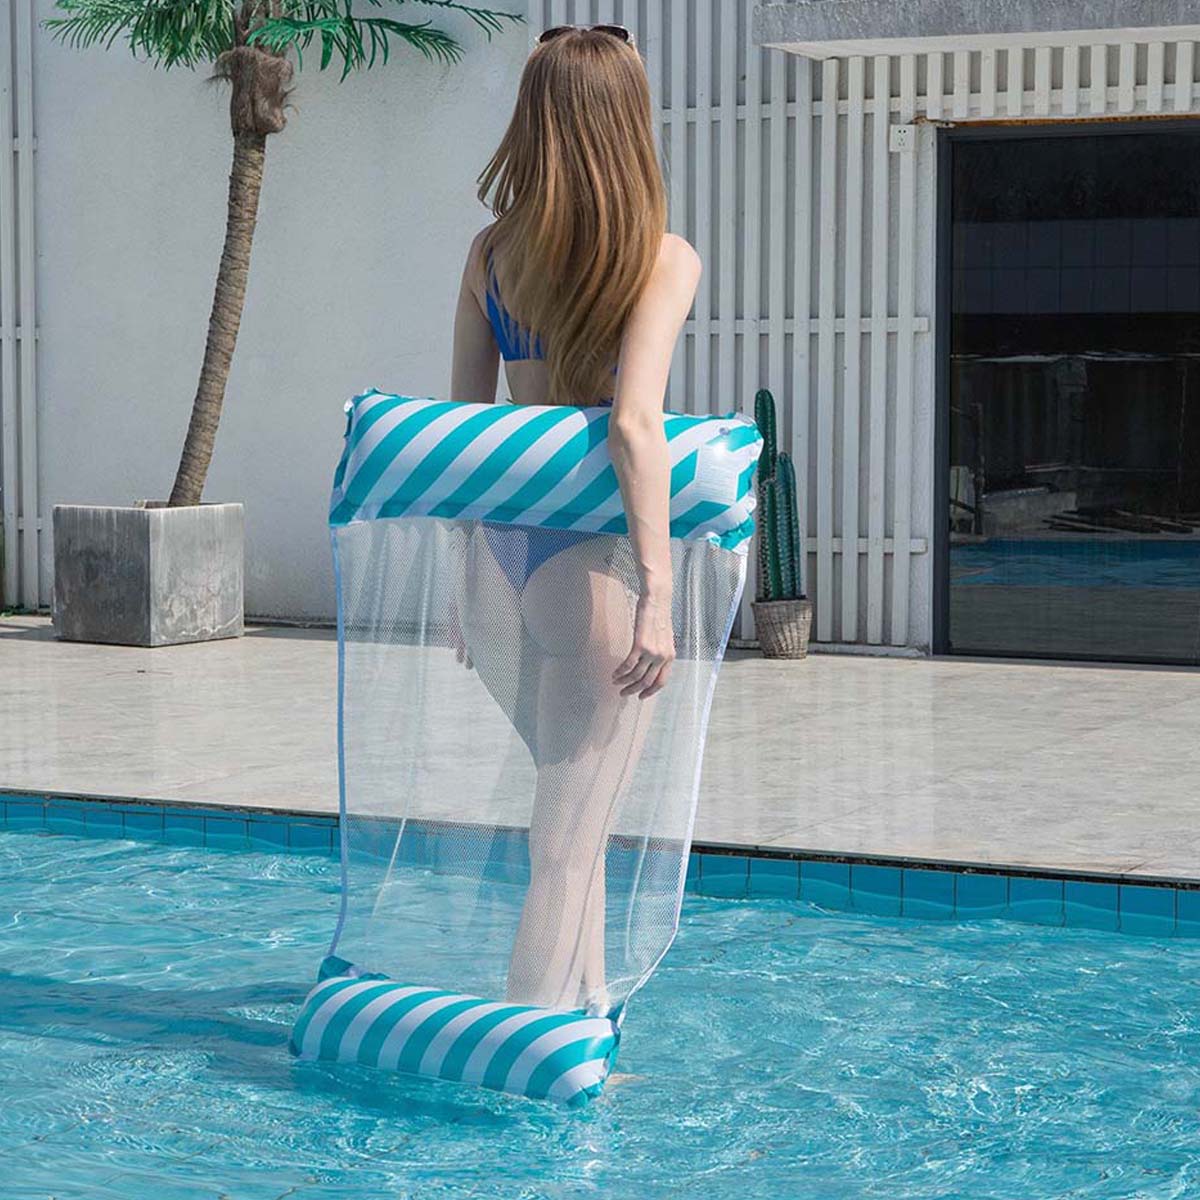 122x70cm-Swimming-Inflatable-Mattress-Water-Float-Hammock-Floating-Bed-Chair-Toy-Swimming-Pools-Trai-1844734-6